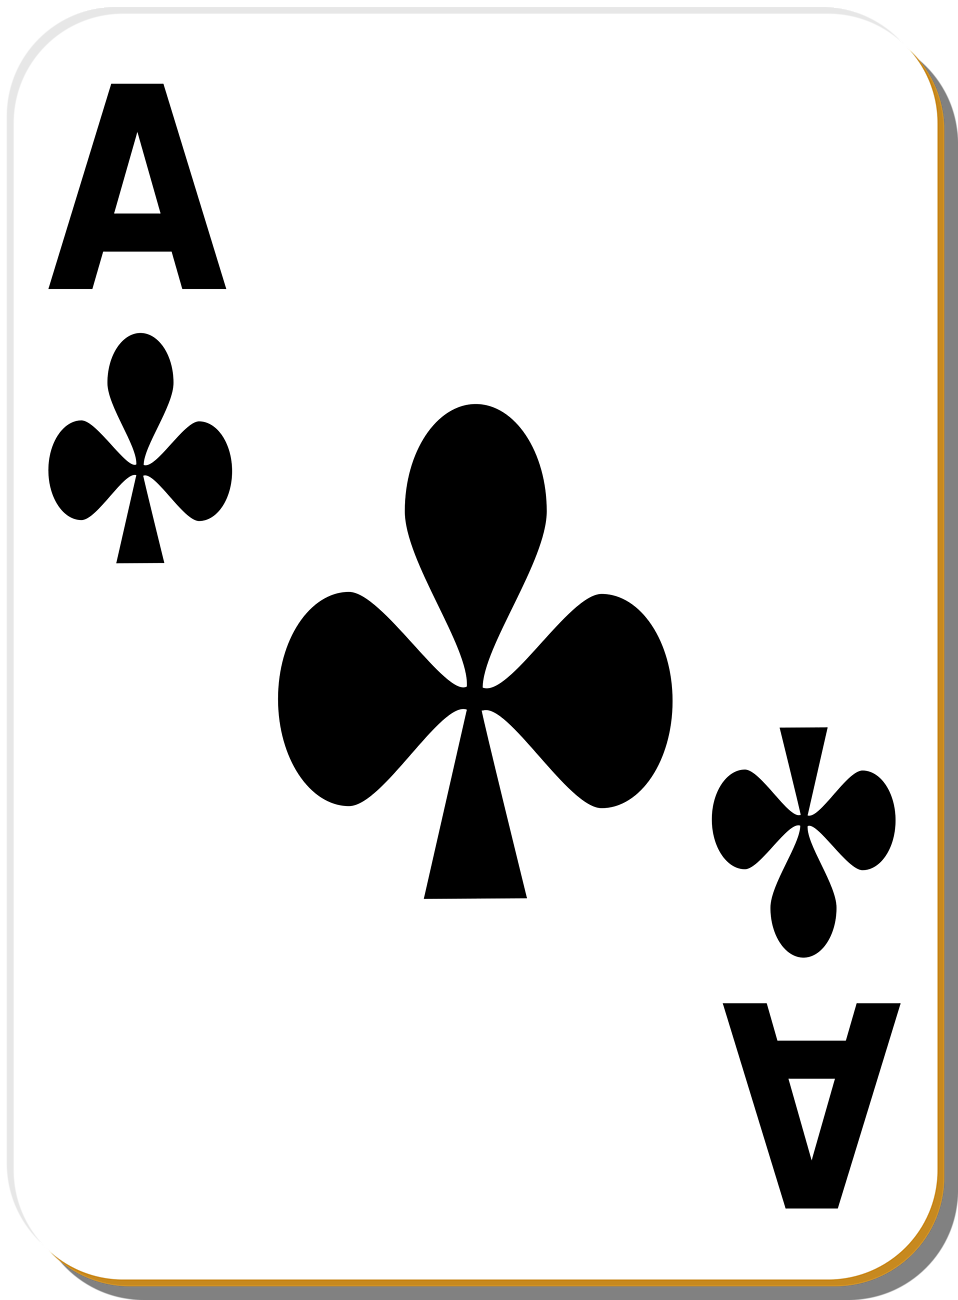 Playing Card | Free Stock Photo | Illustration of an Ace of Clubs ...